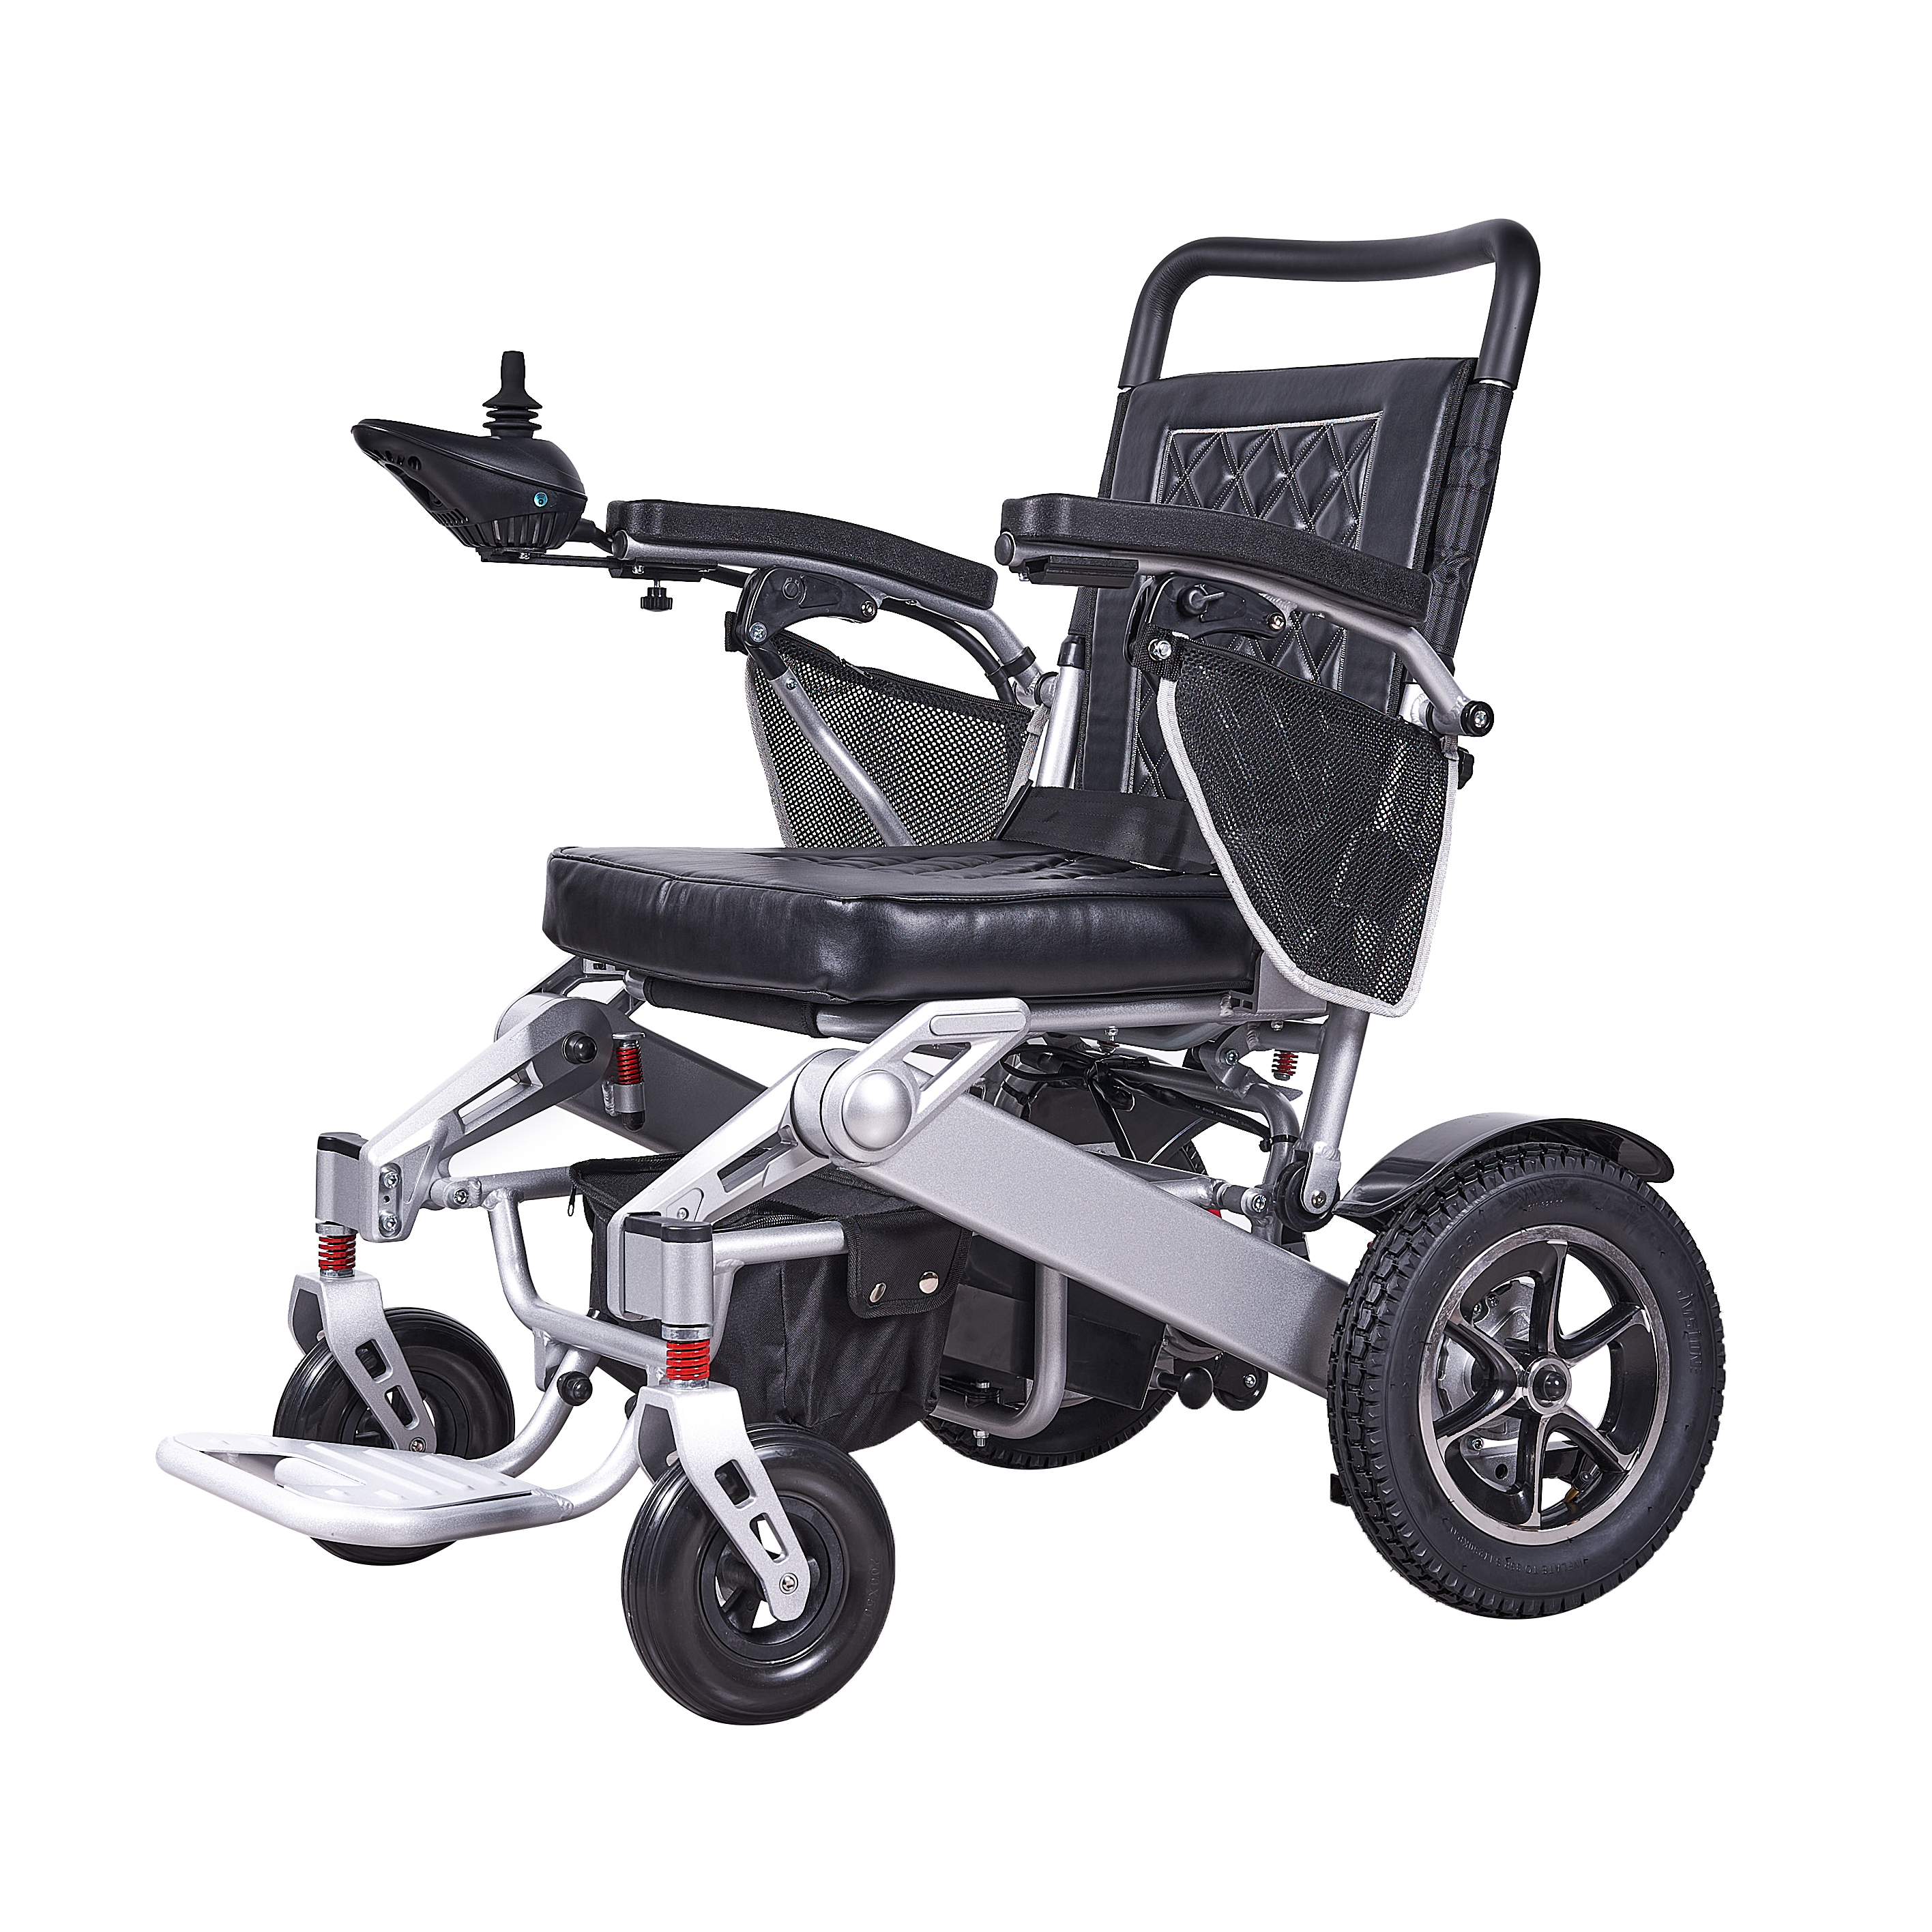 OEM Electric Wheelchairs Fda Company –  Economy Foldable Manual Wheelchair Direct China Factory Steel Wheel Chair with Competitive Price  – BAICHEN